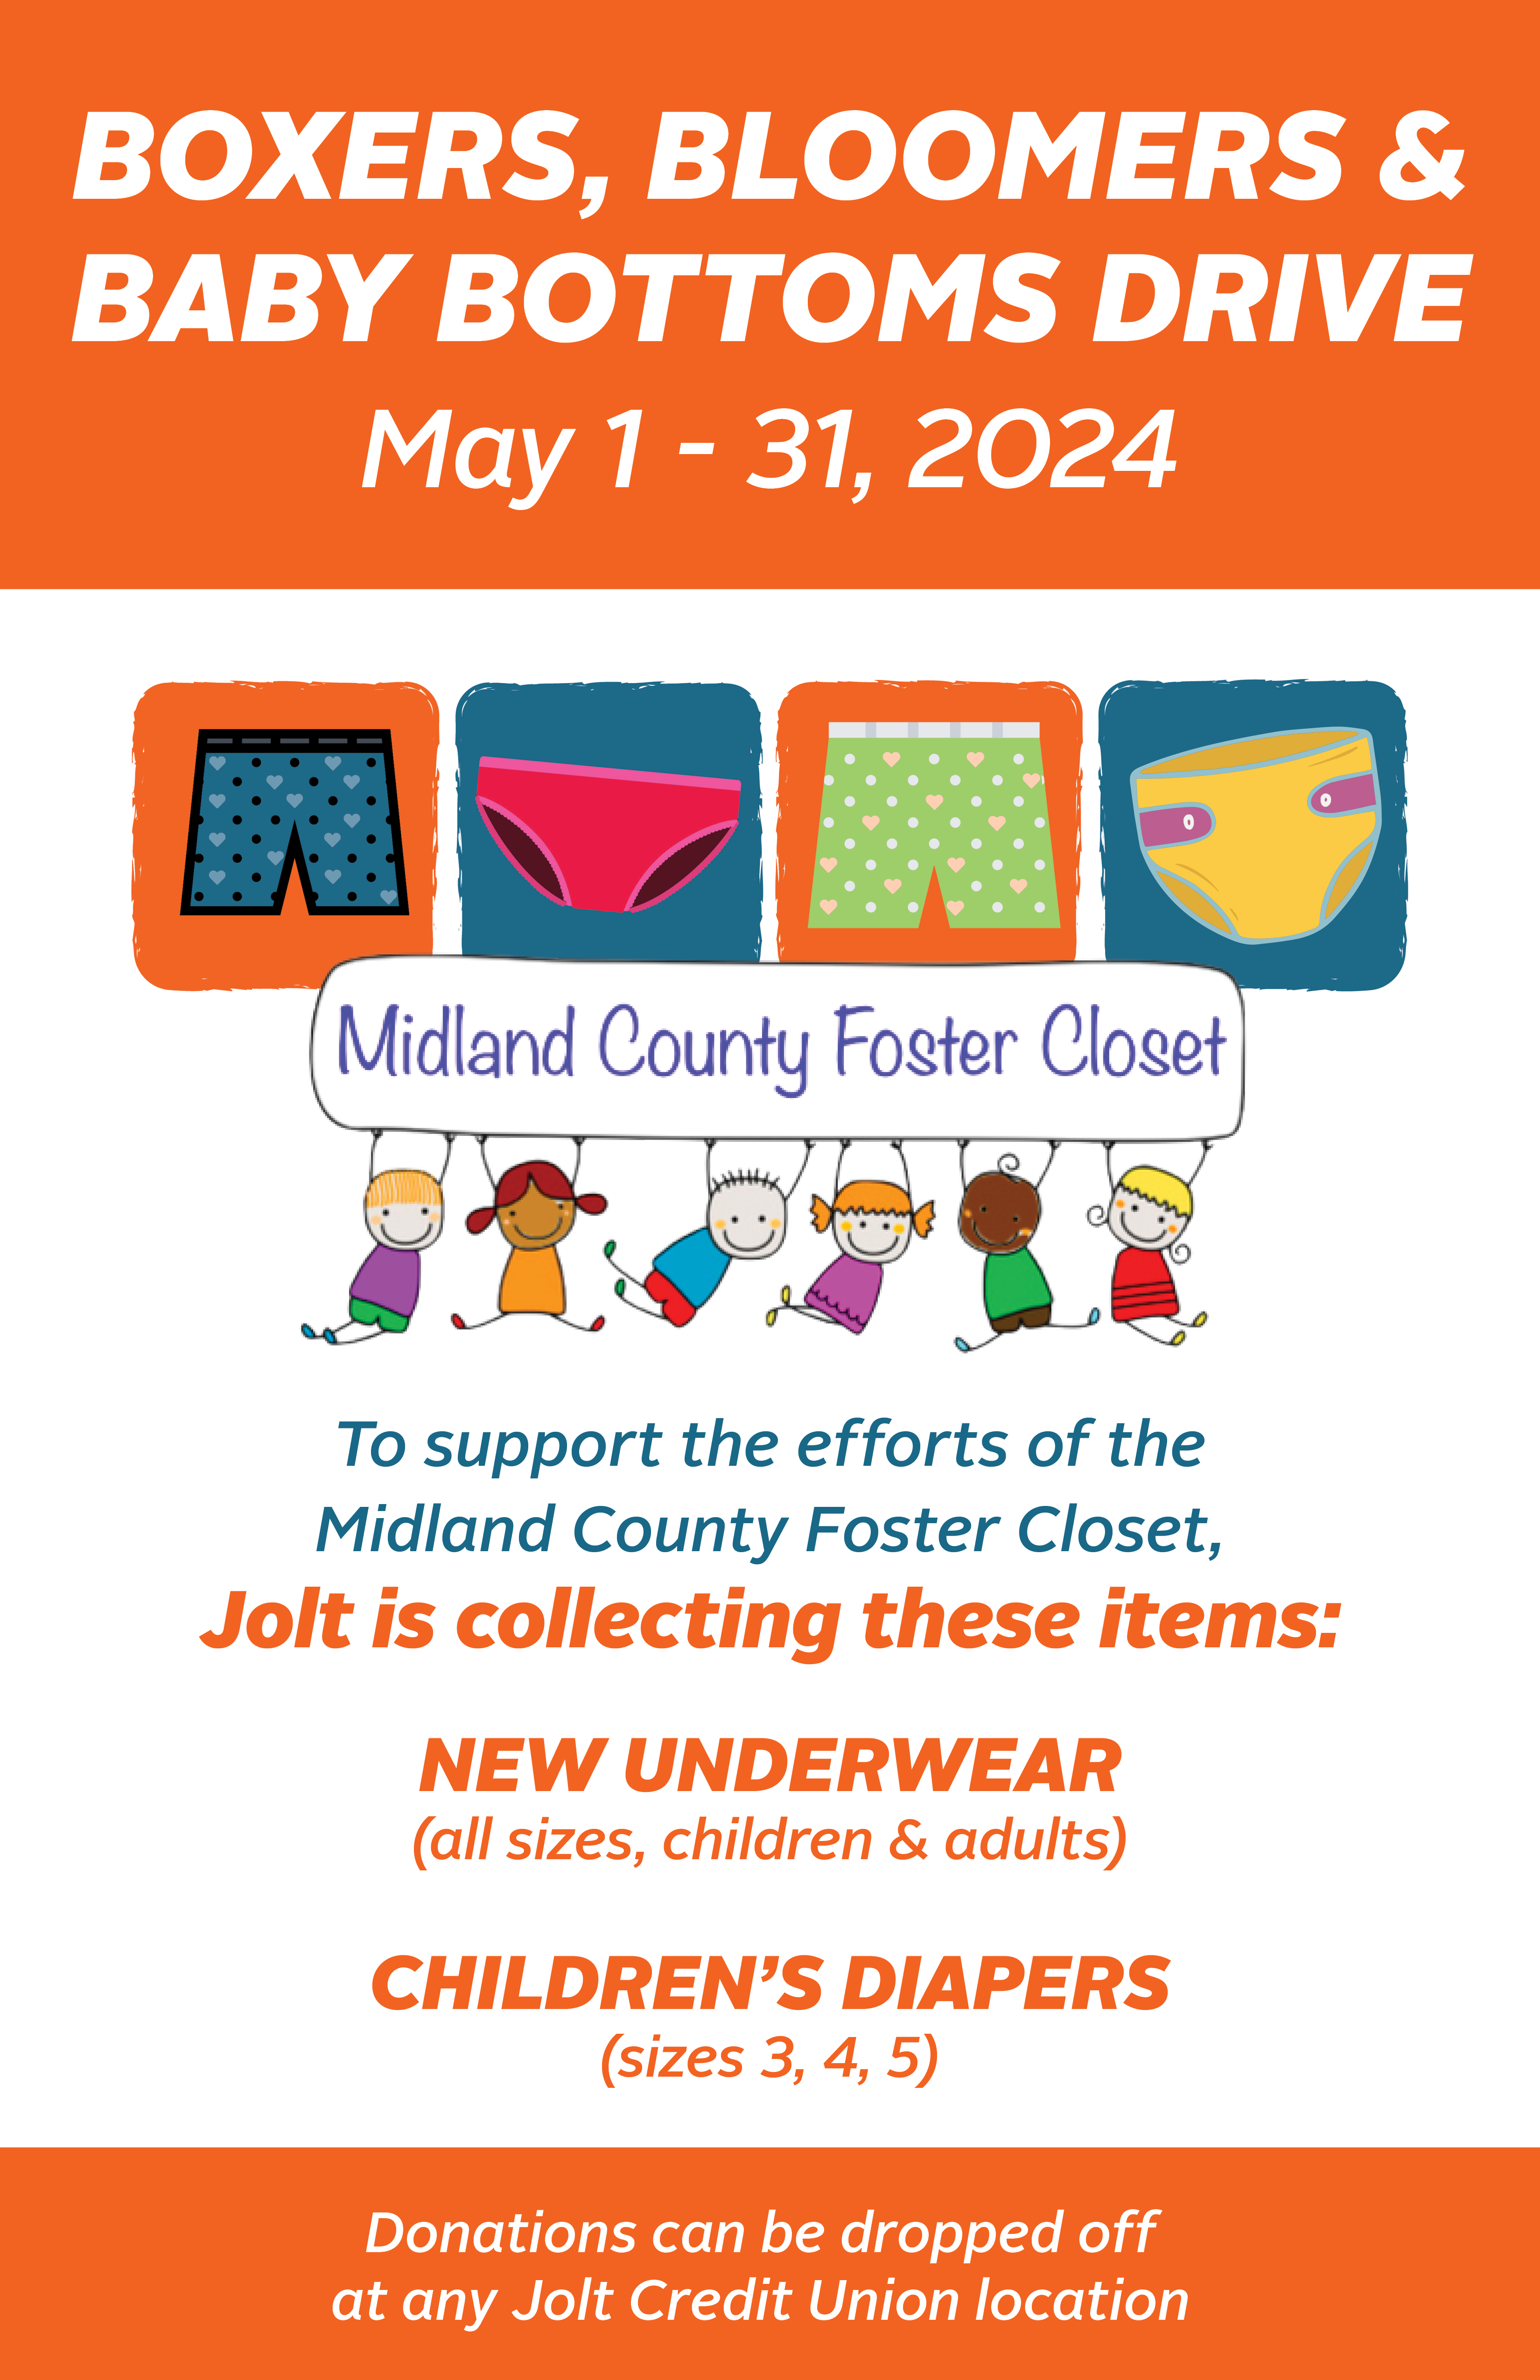 	 Jolt Credit Union is collecting new underwear in all sizes (children and adults) and diapers (sizes 3, 4, 5) to support the efforts of the Midland County Foster Closet. Undergarments are one of the most needed items, but the least donated. Donations will be accepted until May 31st at all Jolt locations.  Donations can be dropped off at any Jolt Credit Union location.